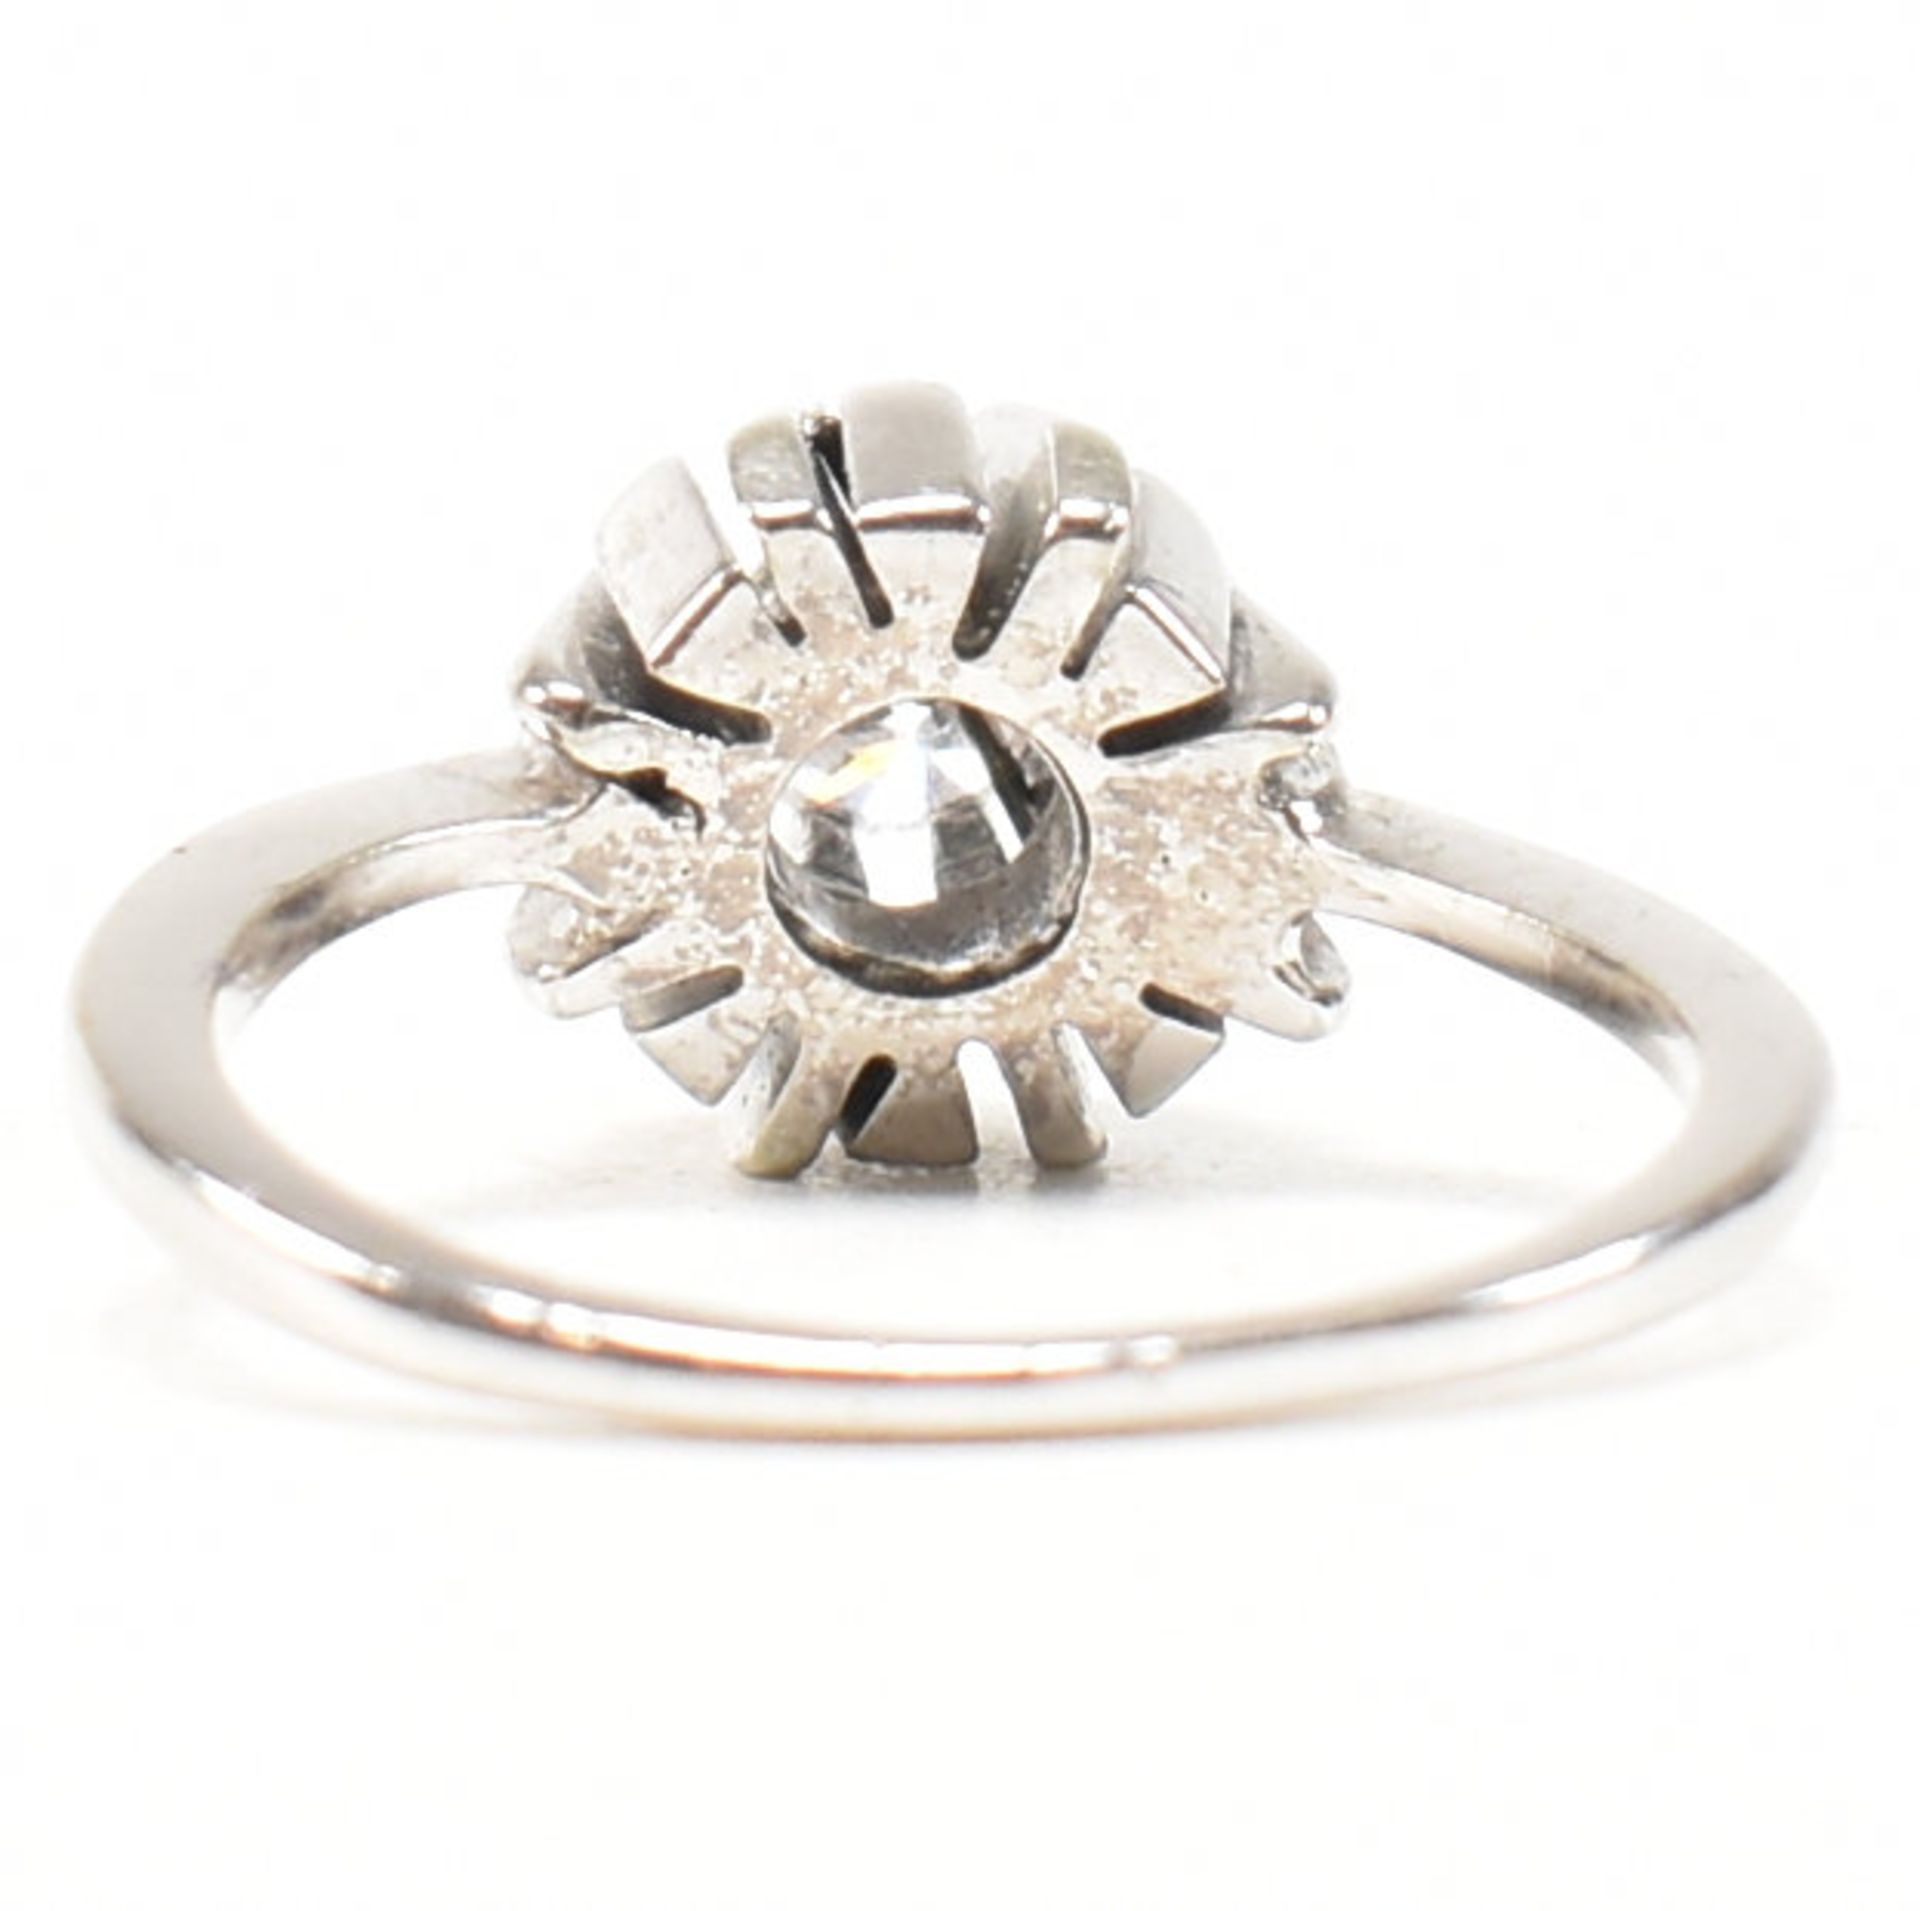 WHITE GOLD & DIAMOND SOLITAIRE RING - Image 7 of 10